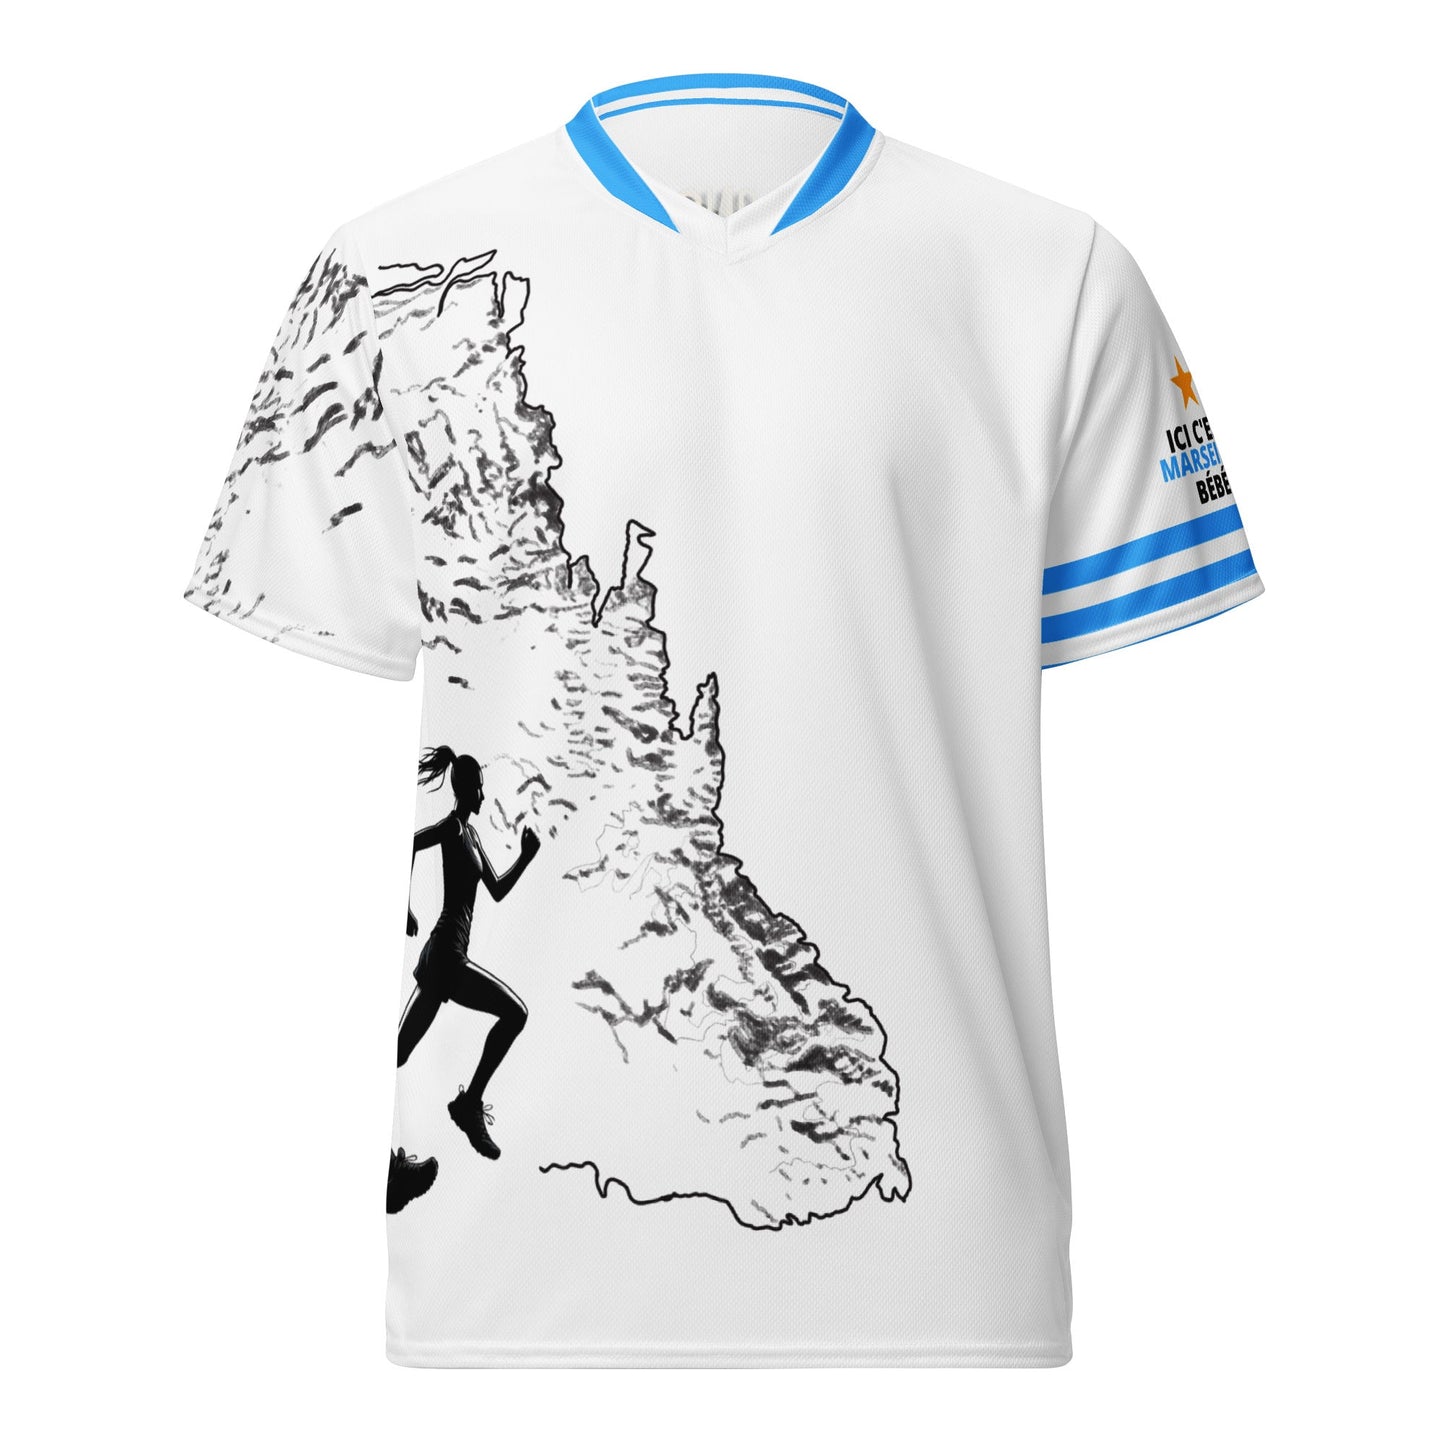 Maillot Running - Unisexe - French Cities - Marseille - Le Traileur Anonyme